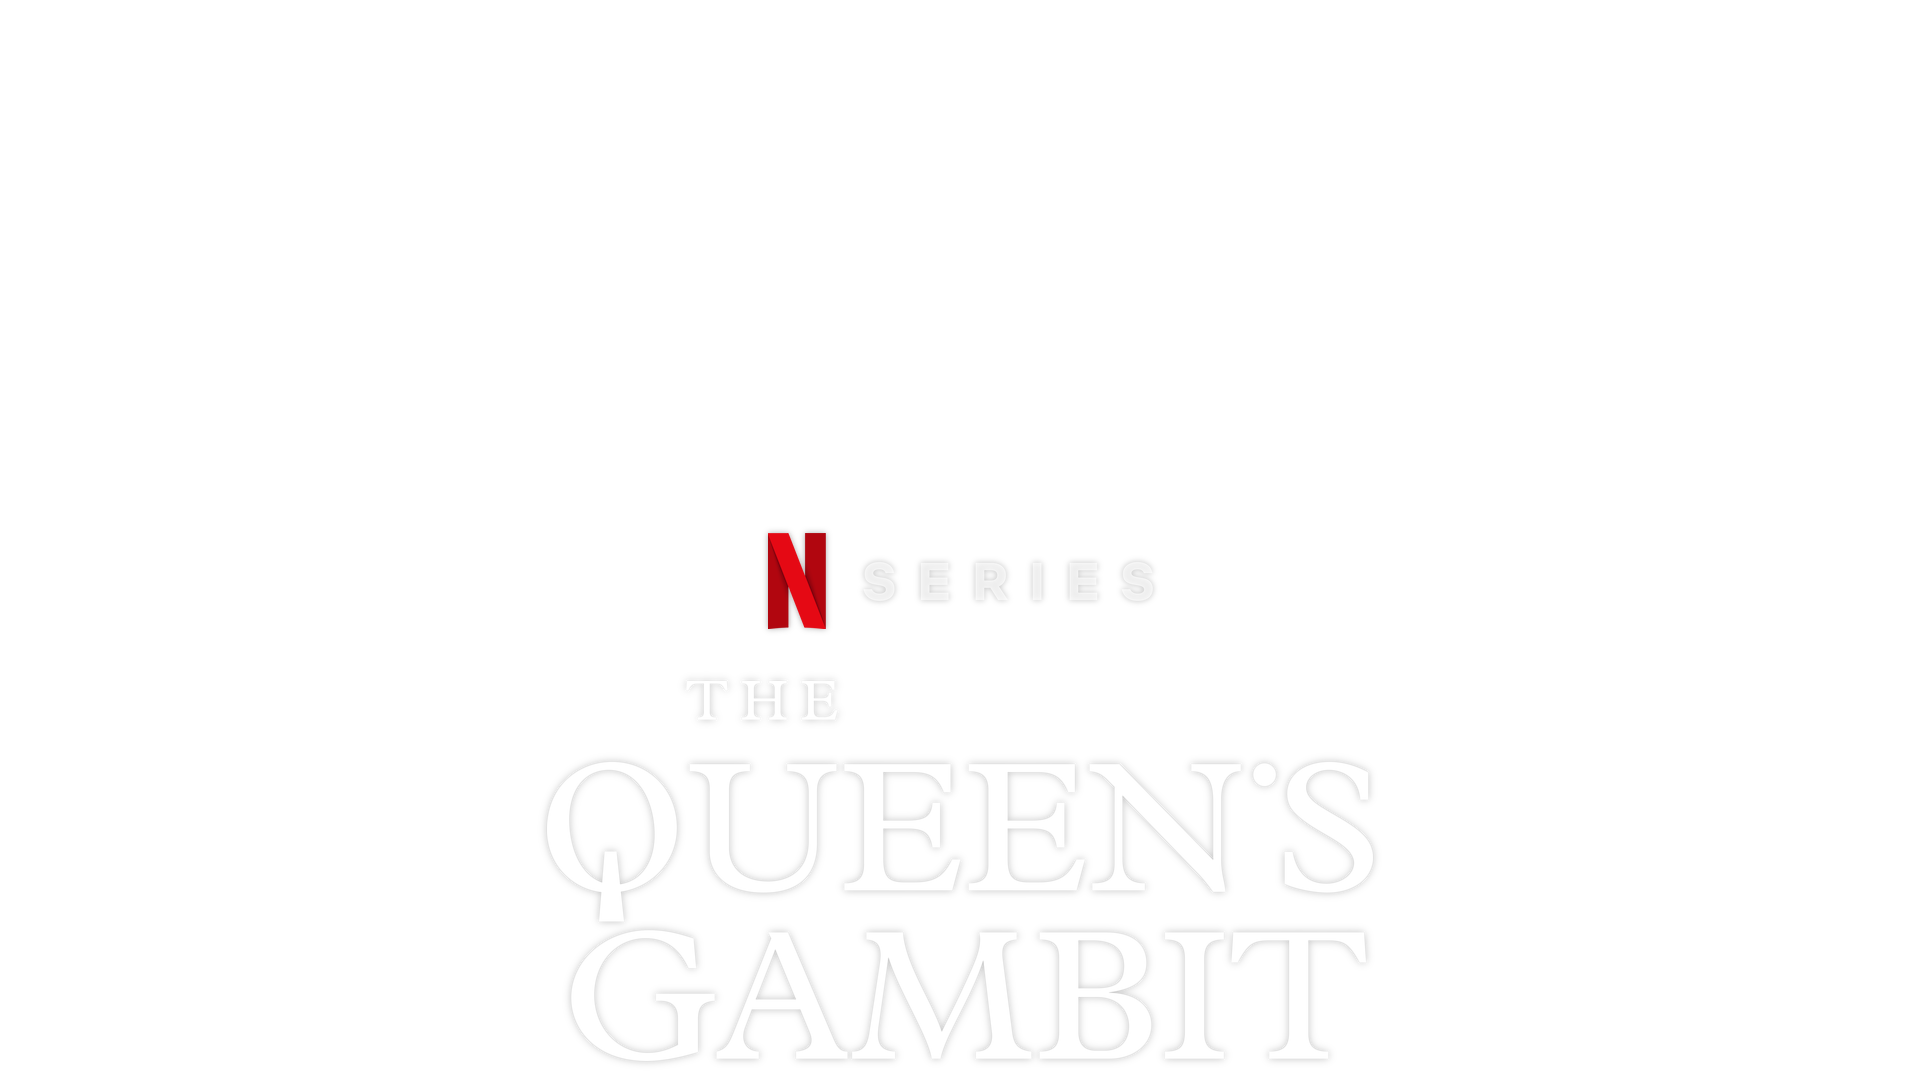 The Queen's Gambit Cast Guide: Where You Recognize The Actors From